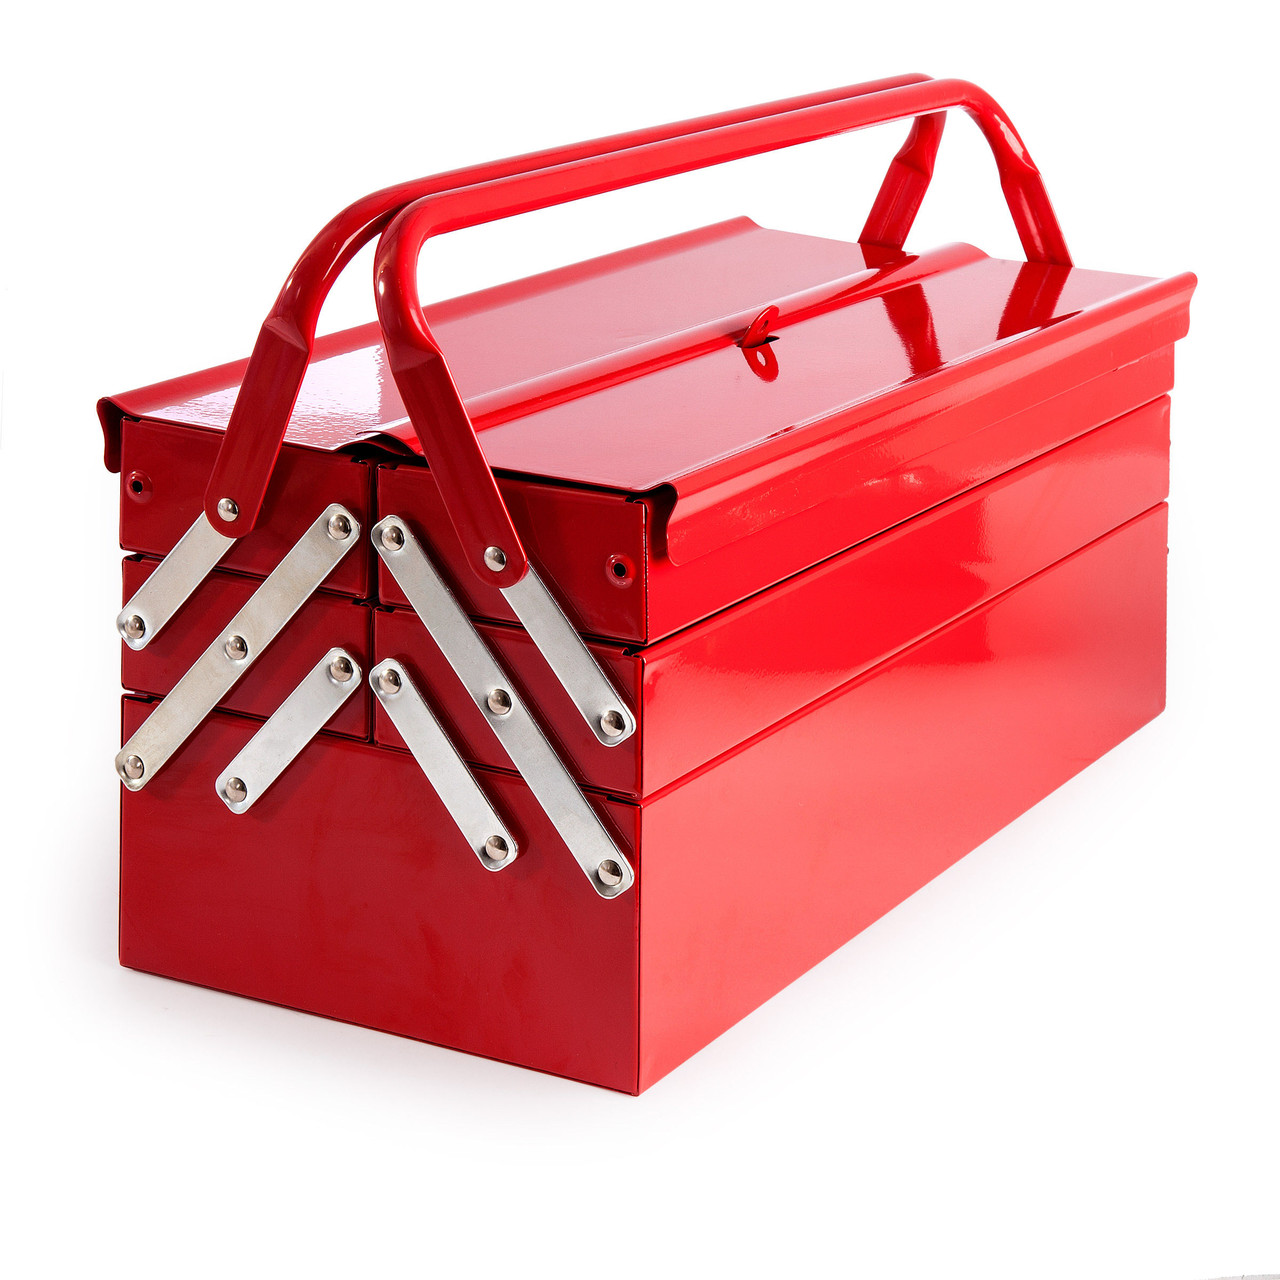 Toolstop 73 Piece Tool Kit in a Cantilever Tool Box - EXCLUSIVE 